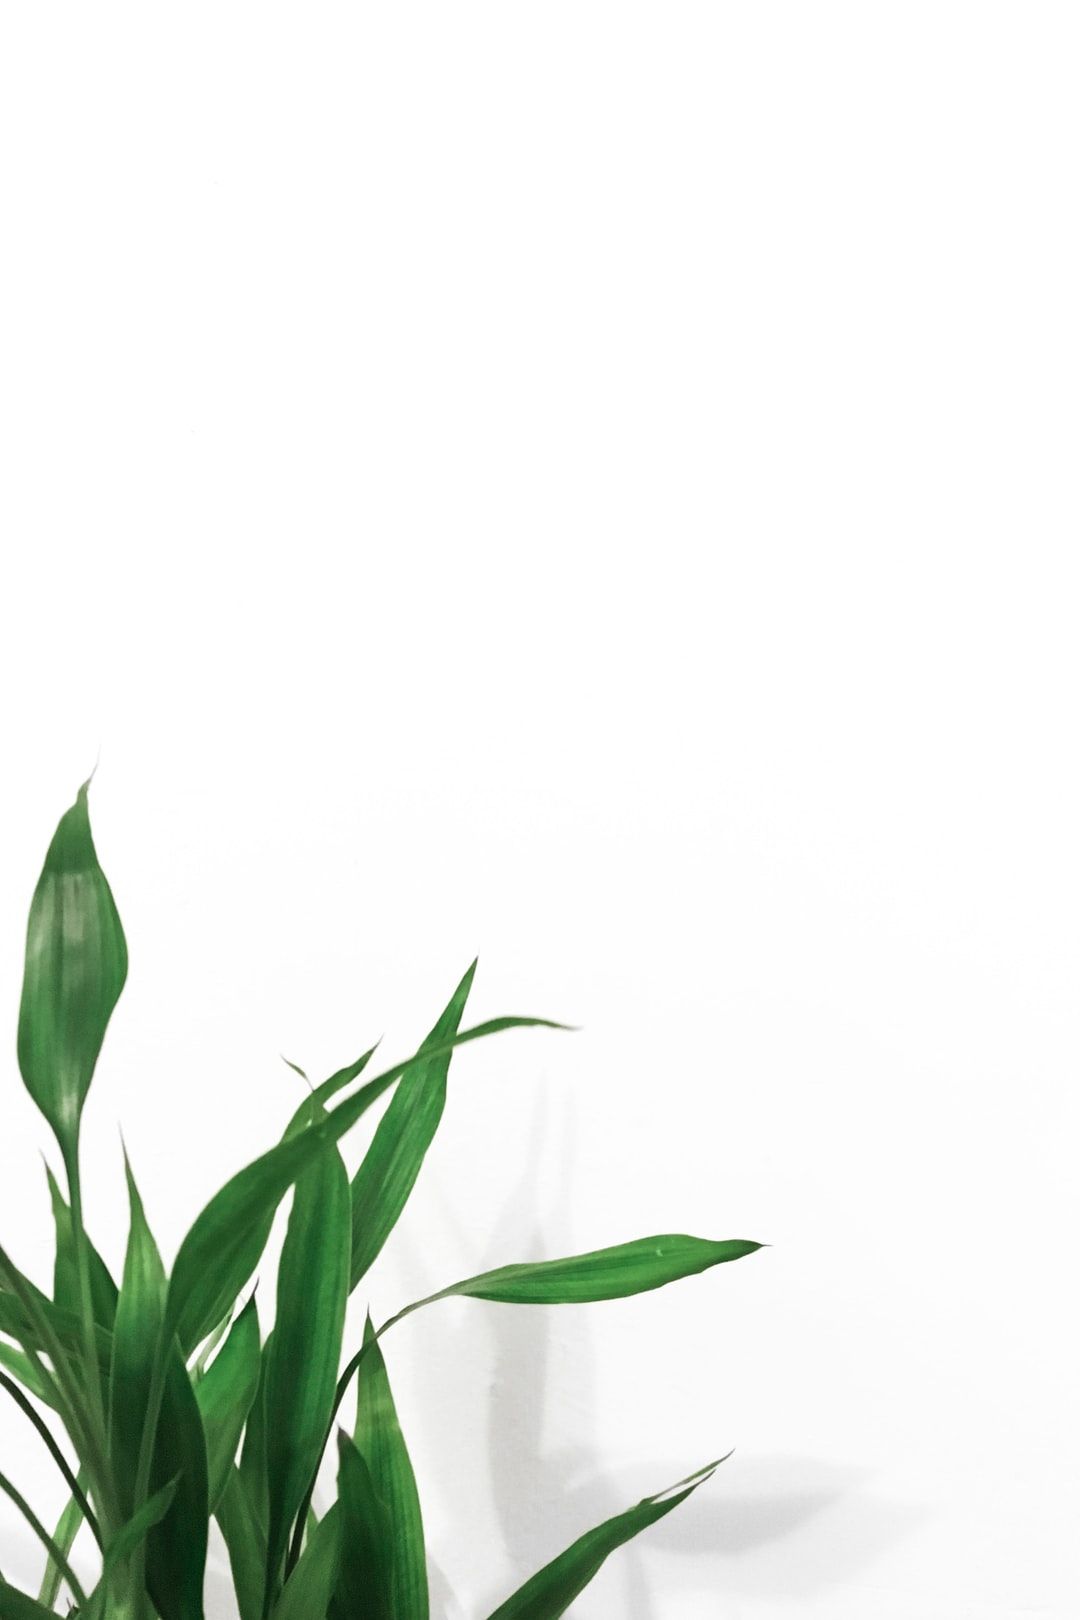 Plants with White Background best free background, white, plant and green photo